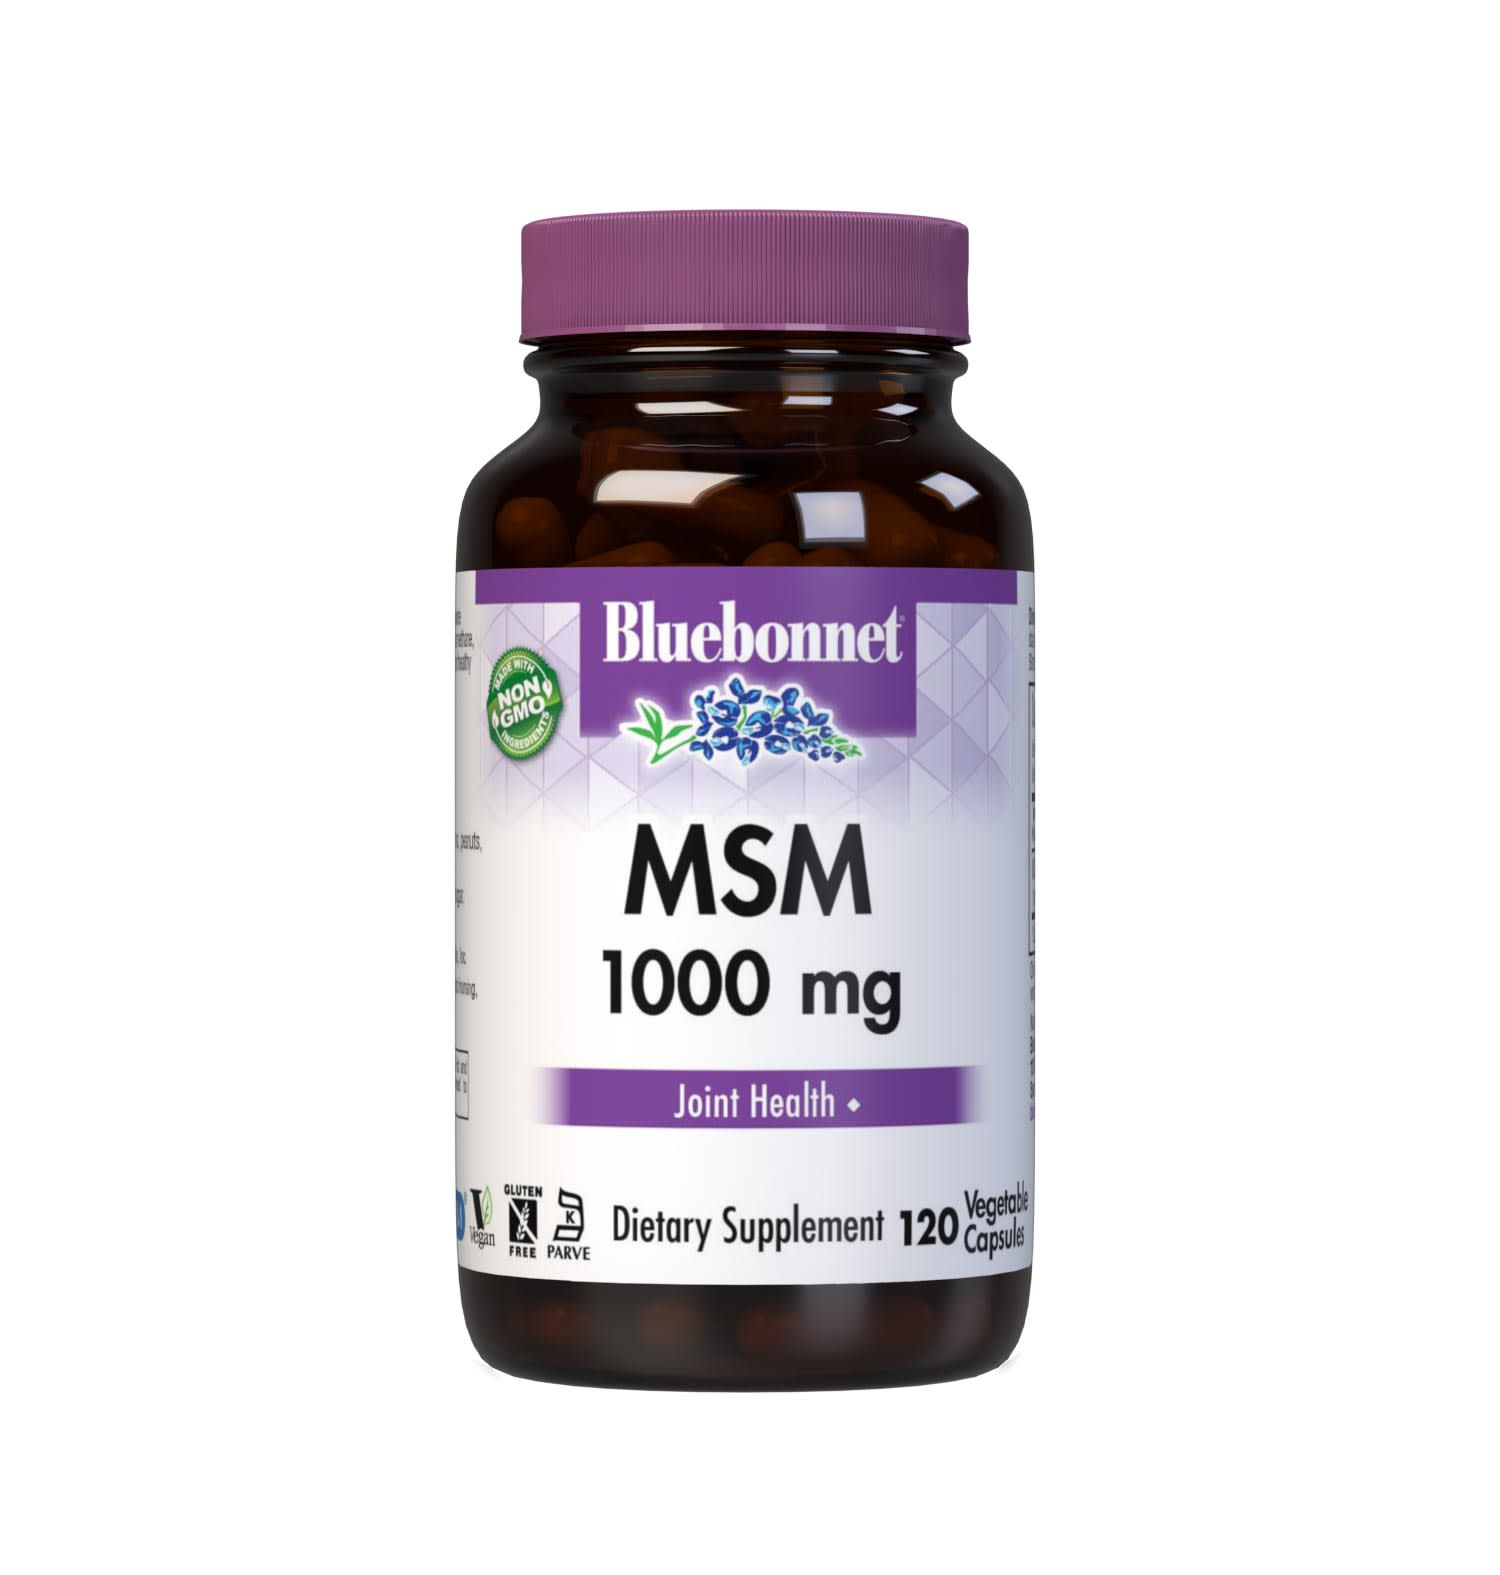 Bluebonnet’s MSM 1000 mg 120 Vegetable Capsules are formulated with patented OptiMSM methylsulfonylmethane, a non-toxic form of active sulfur that is tested in our own state-of-the-art laboratory for purity and potency. MSM helps support healthy joint cartilage and connective tissue. #size_120 count